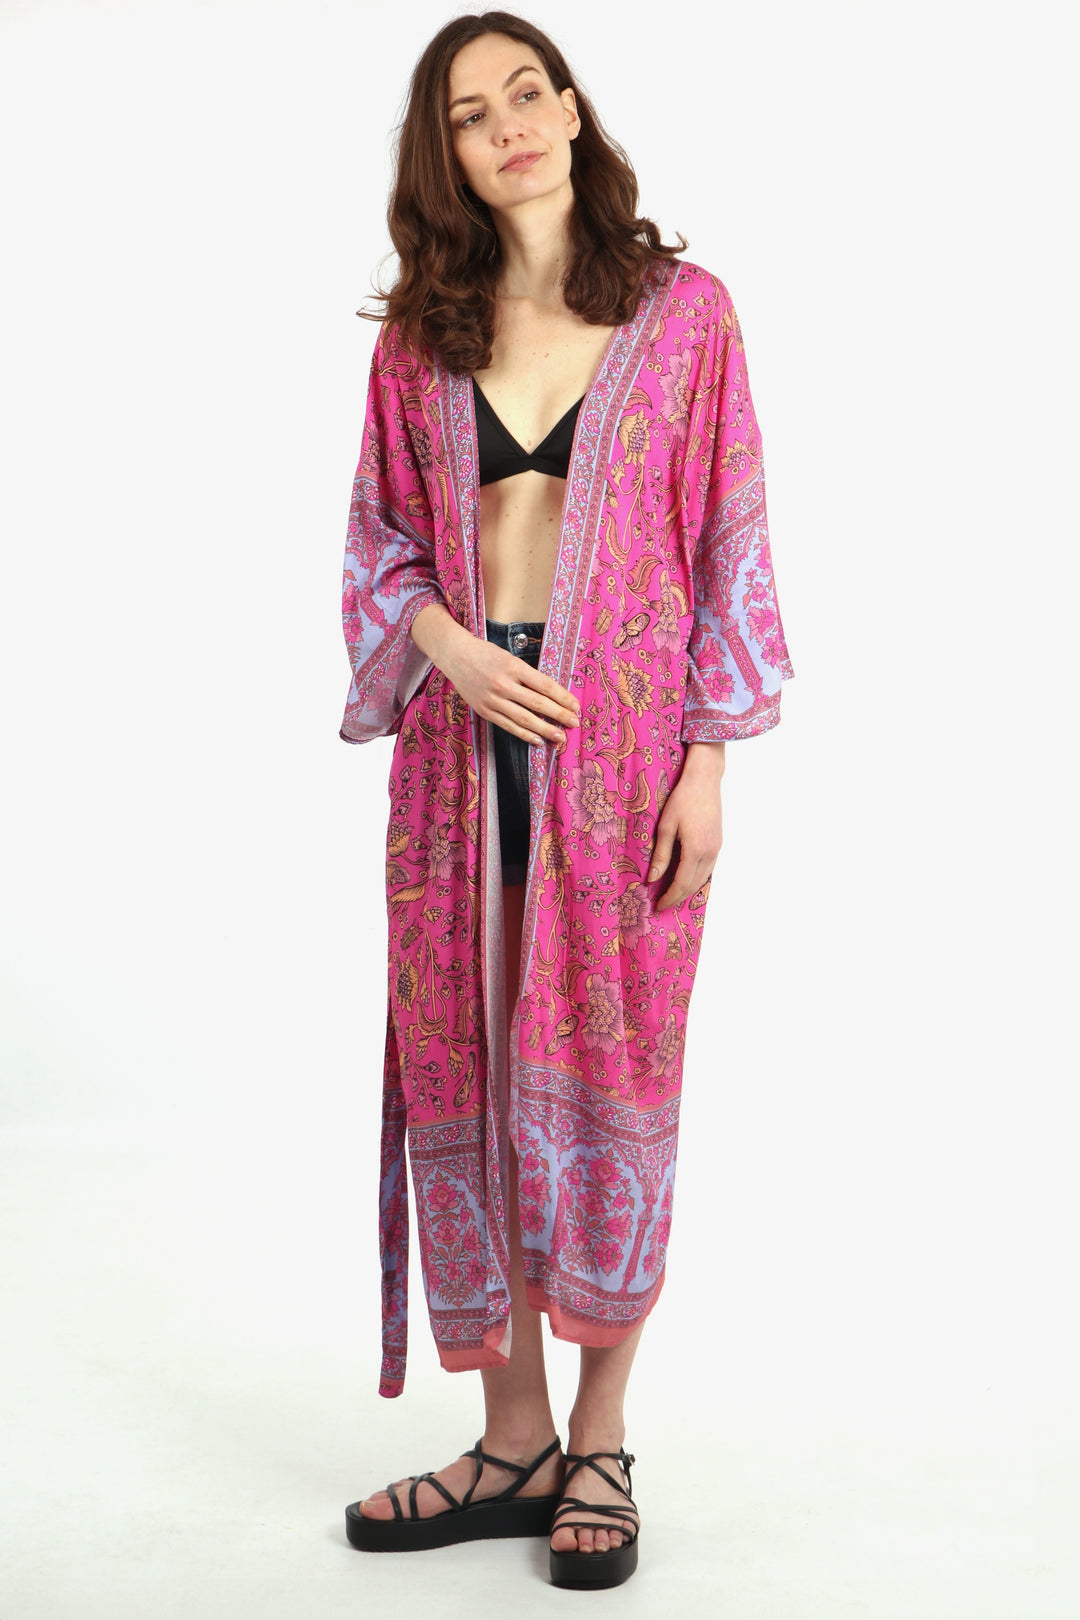 model wearing a long pink kimono robe with an all over vintage floral and butterfly print pattern